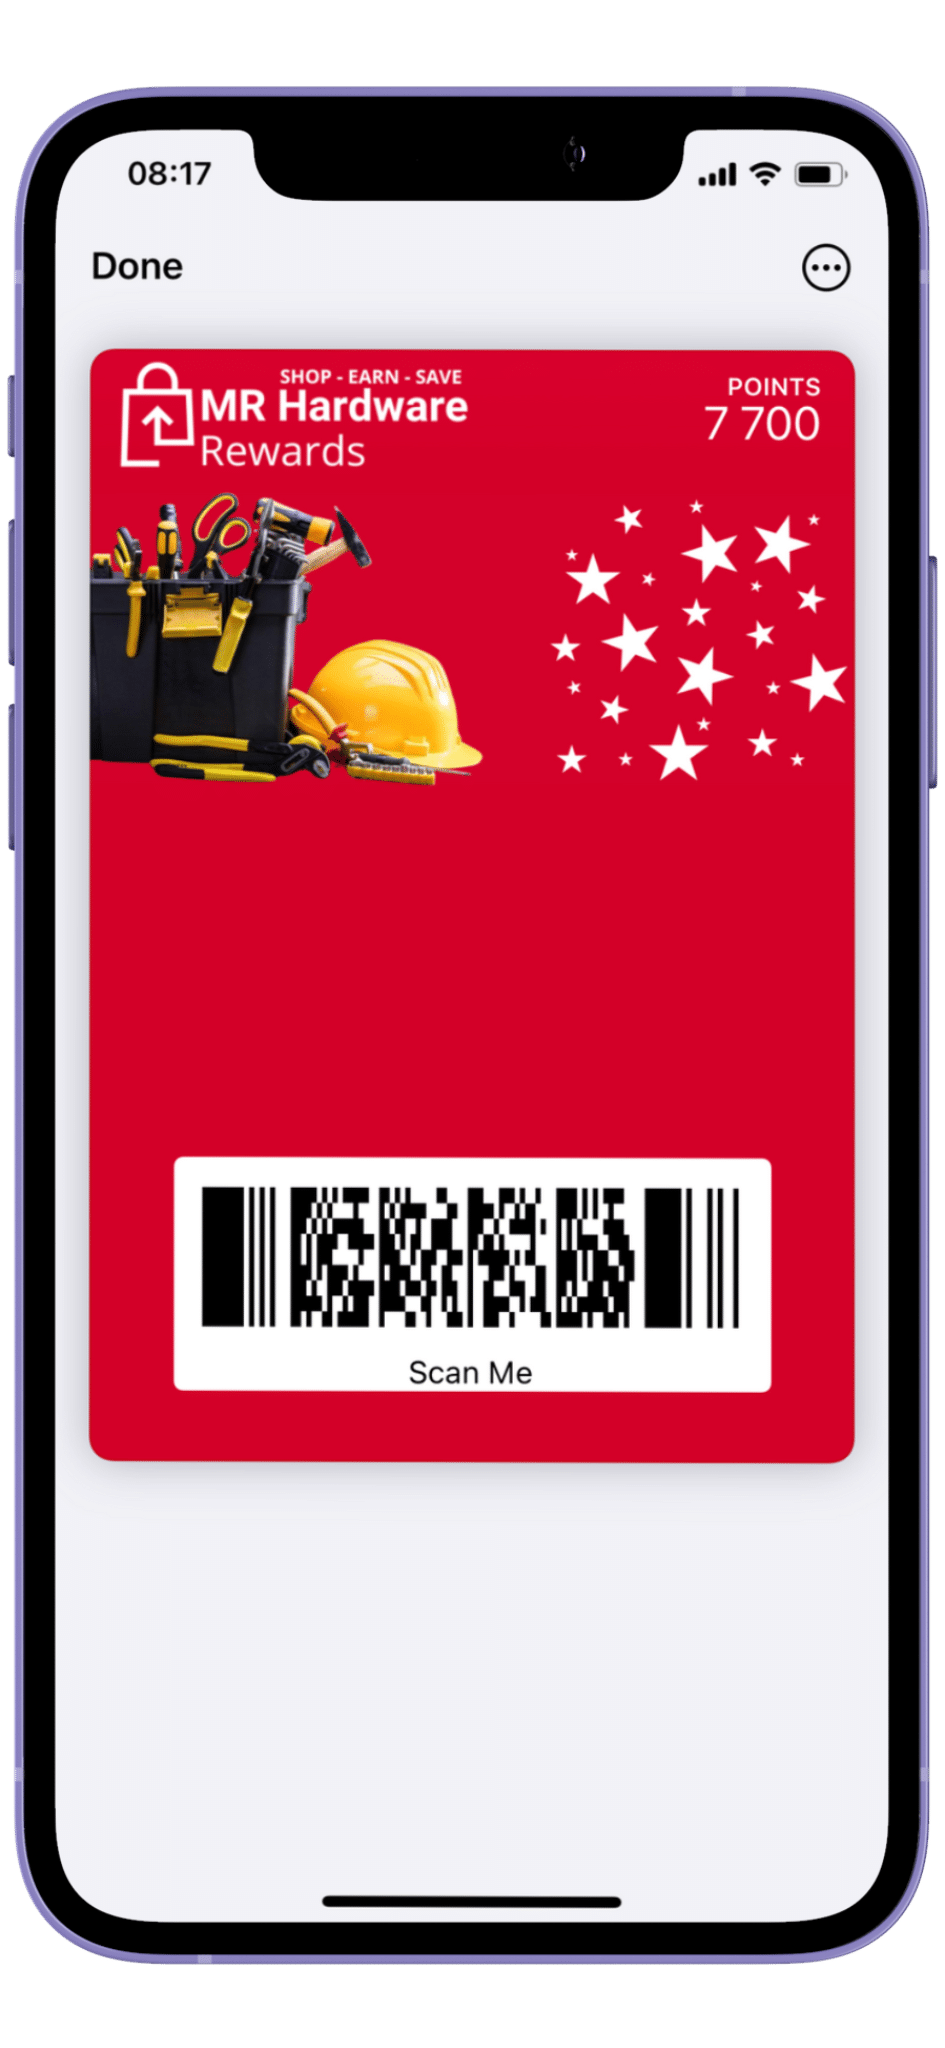 A mobile phone screen displaying a digital loyalty card interface for "mr hardware rewards" with a yellow hard hat and tools, points tally, star ratings, and a scannable barcode.